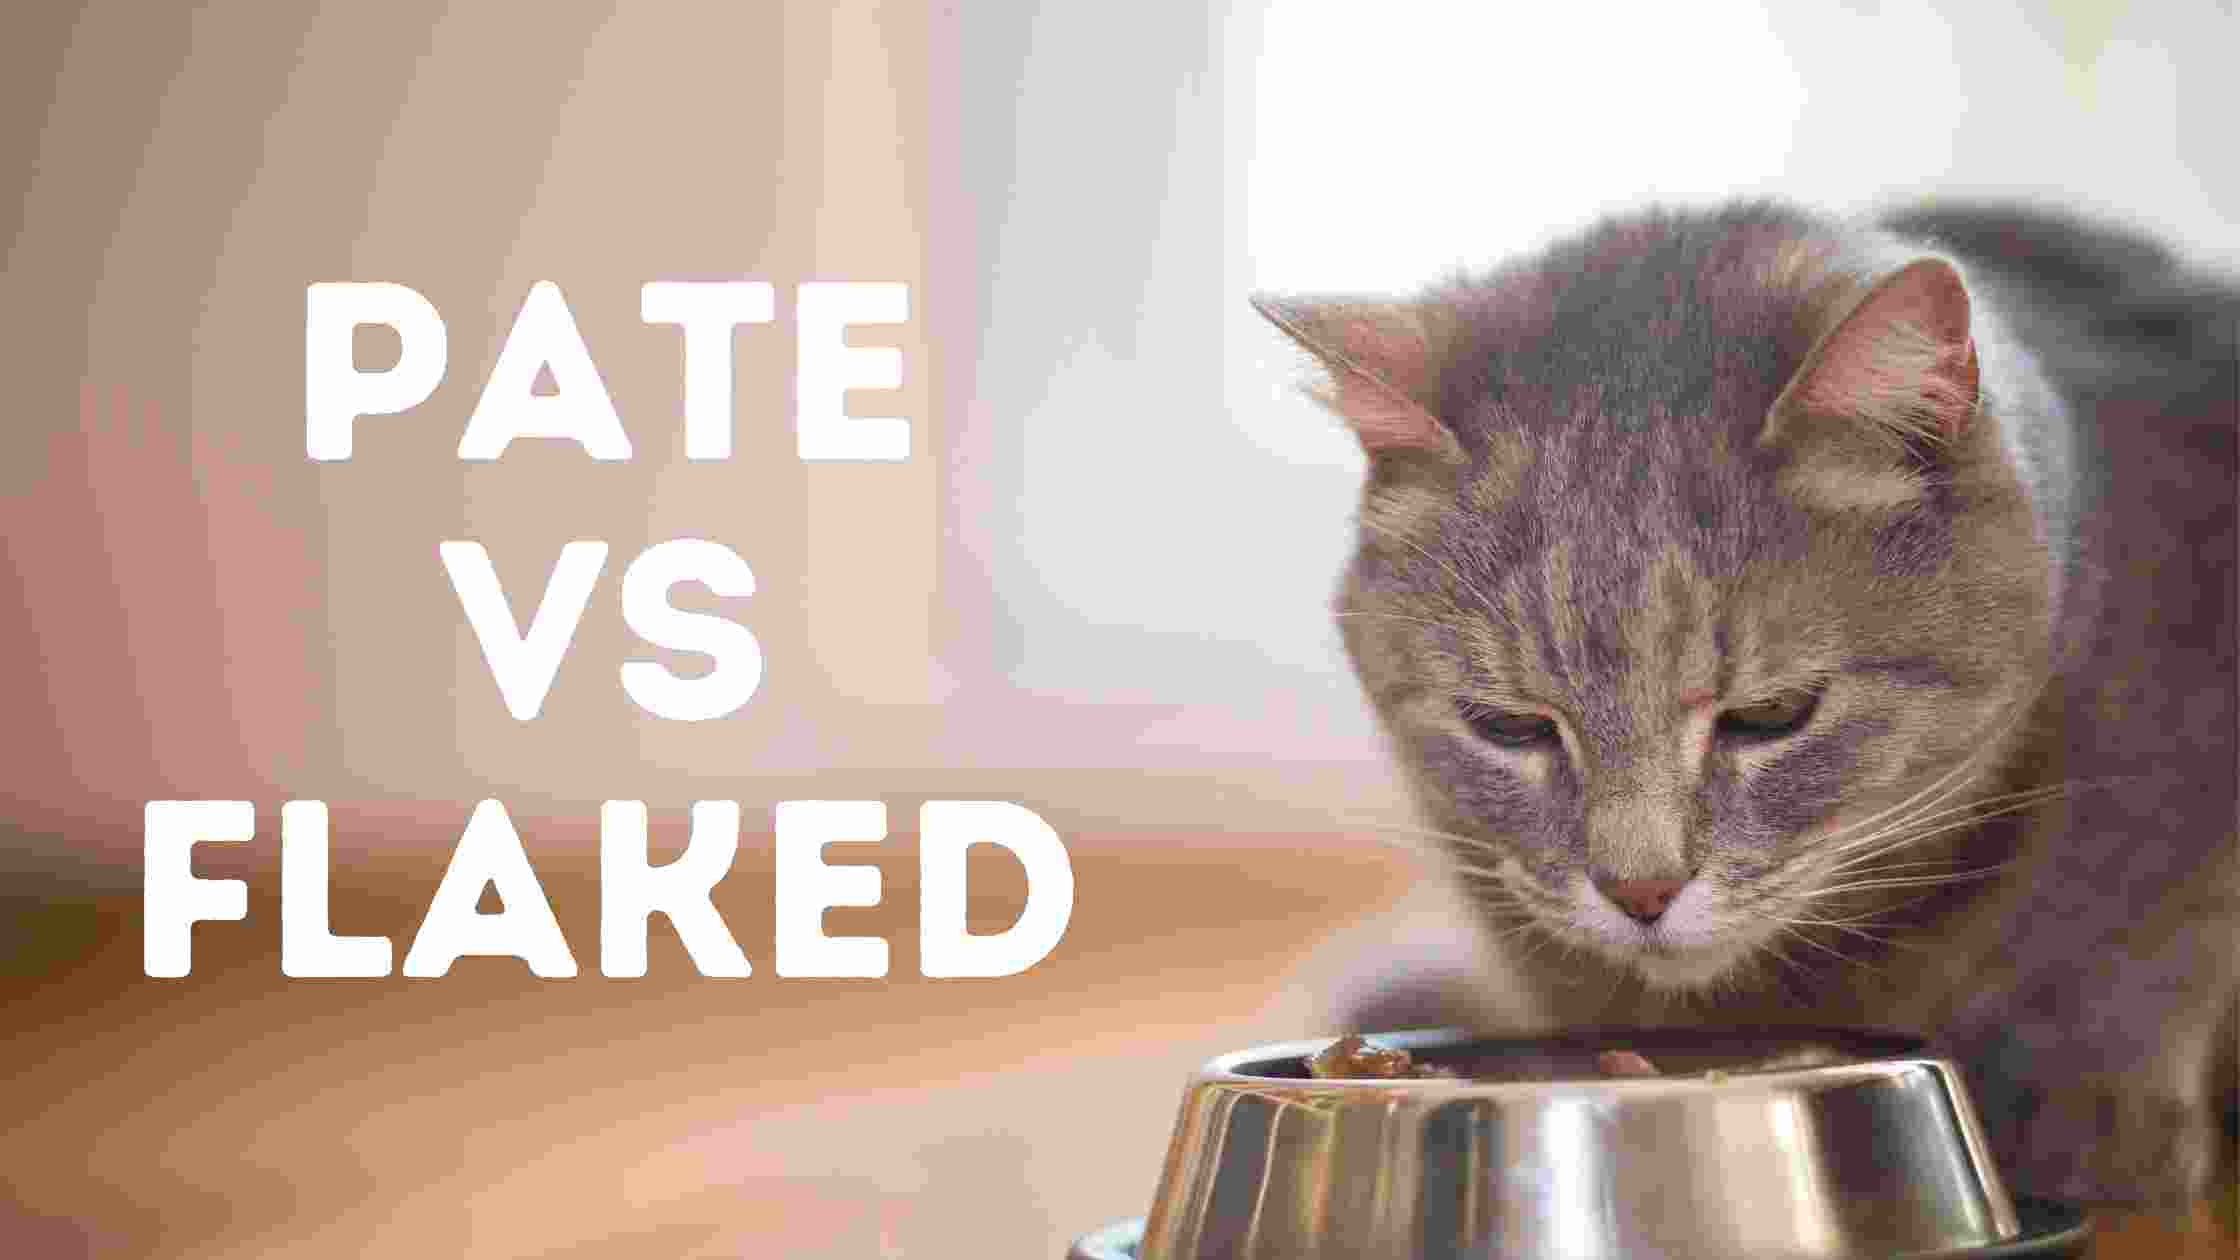 Pate vs Flaked cat food